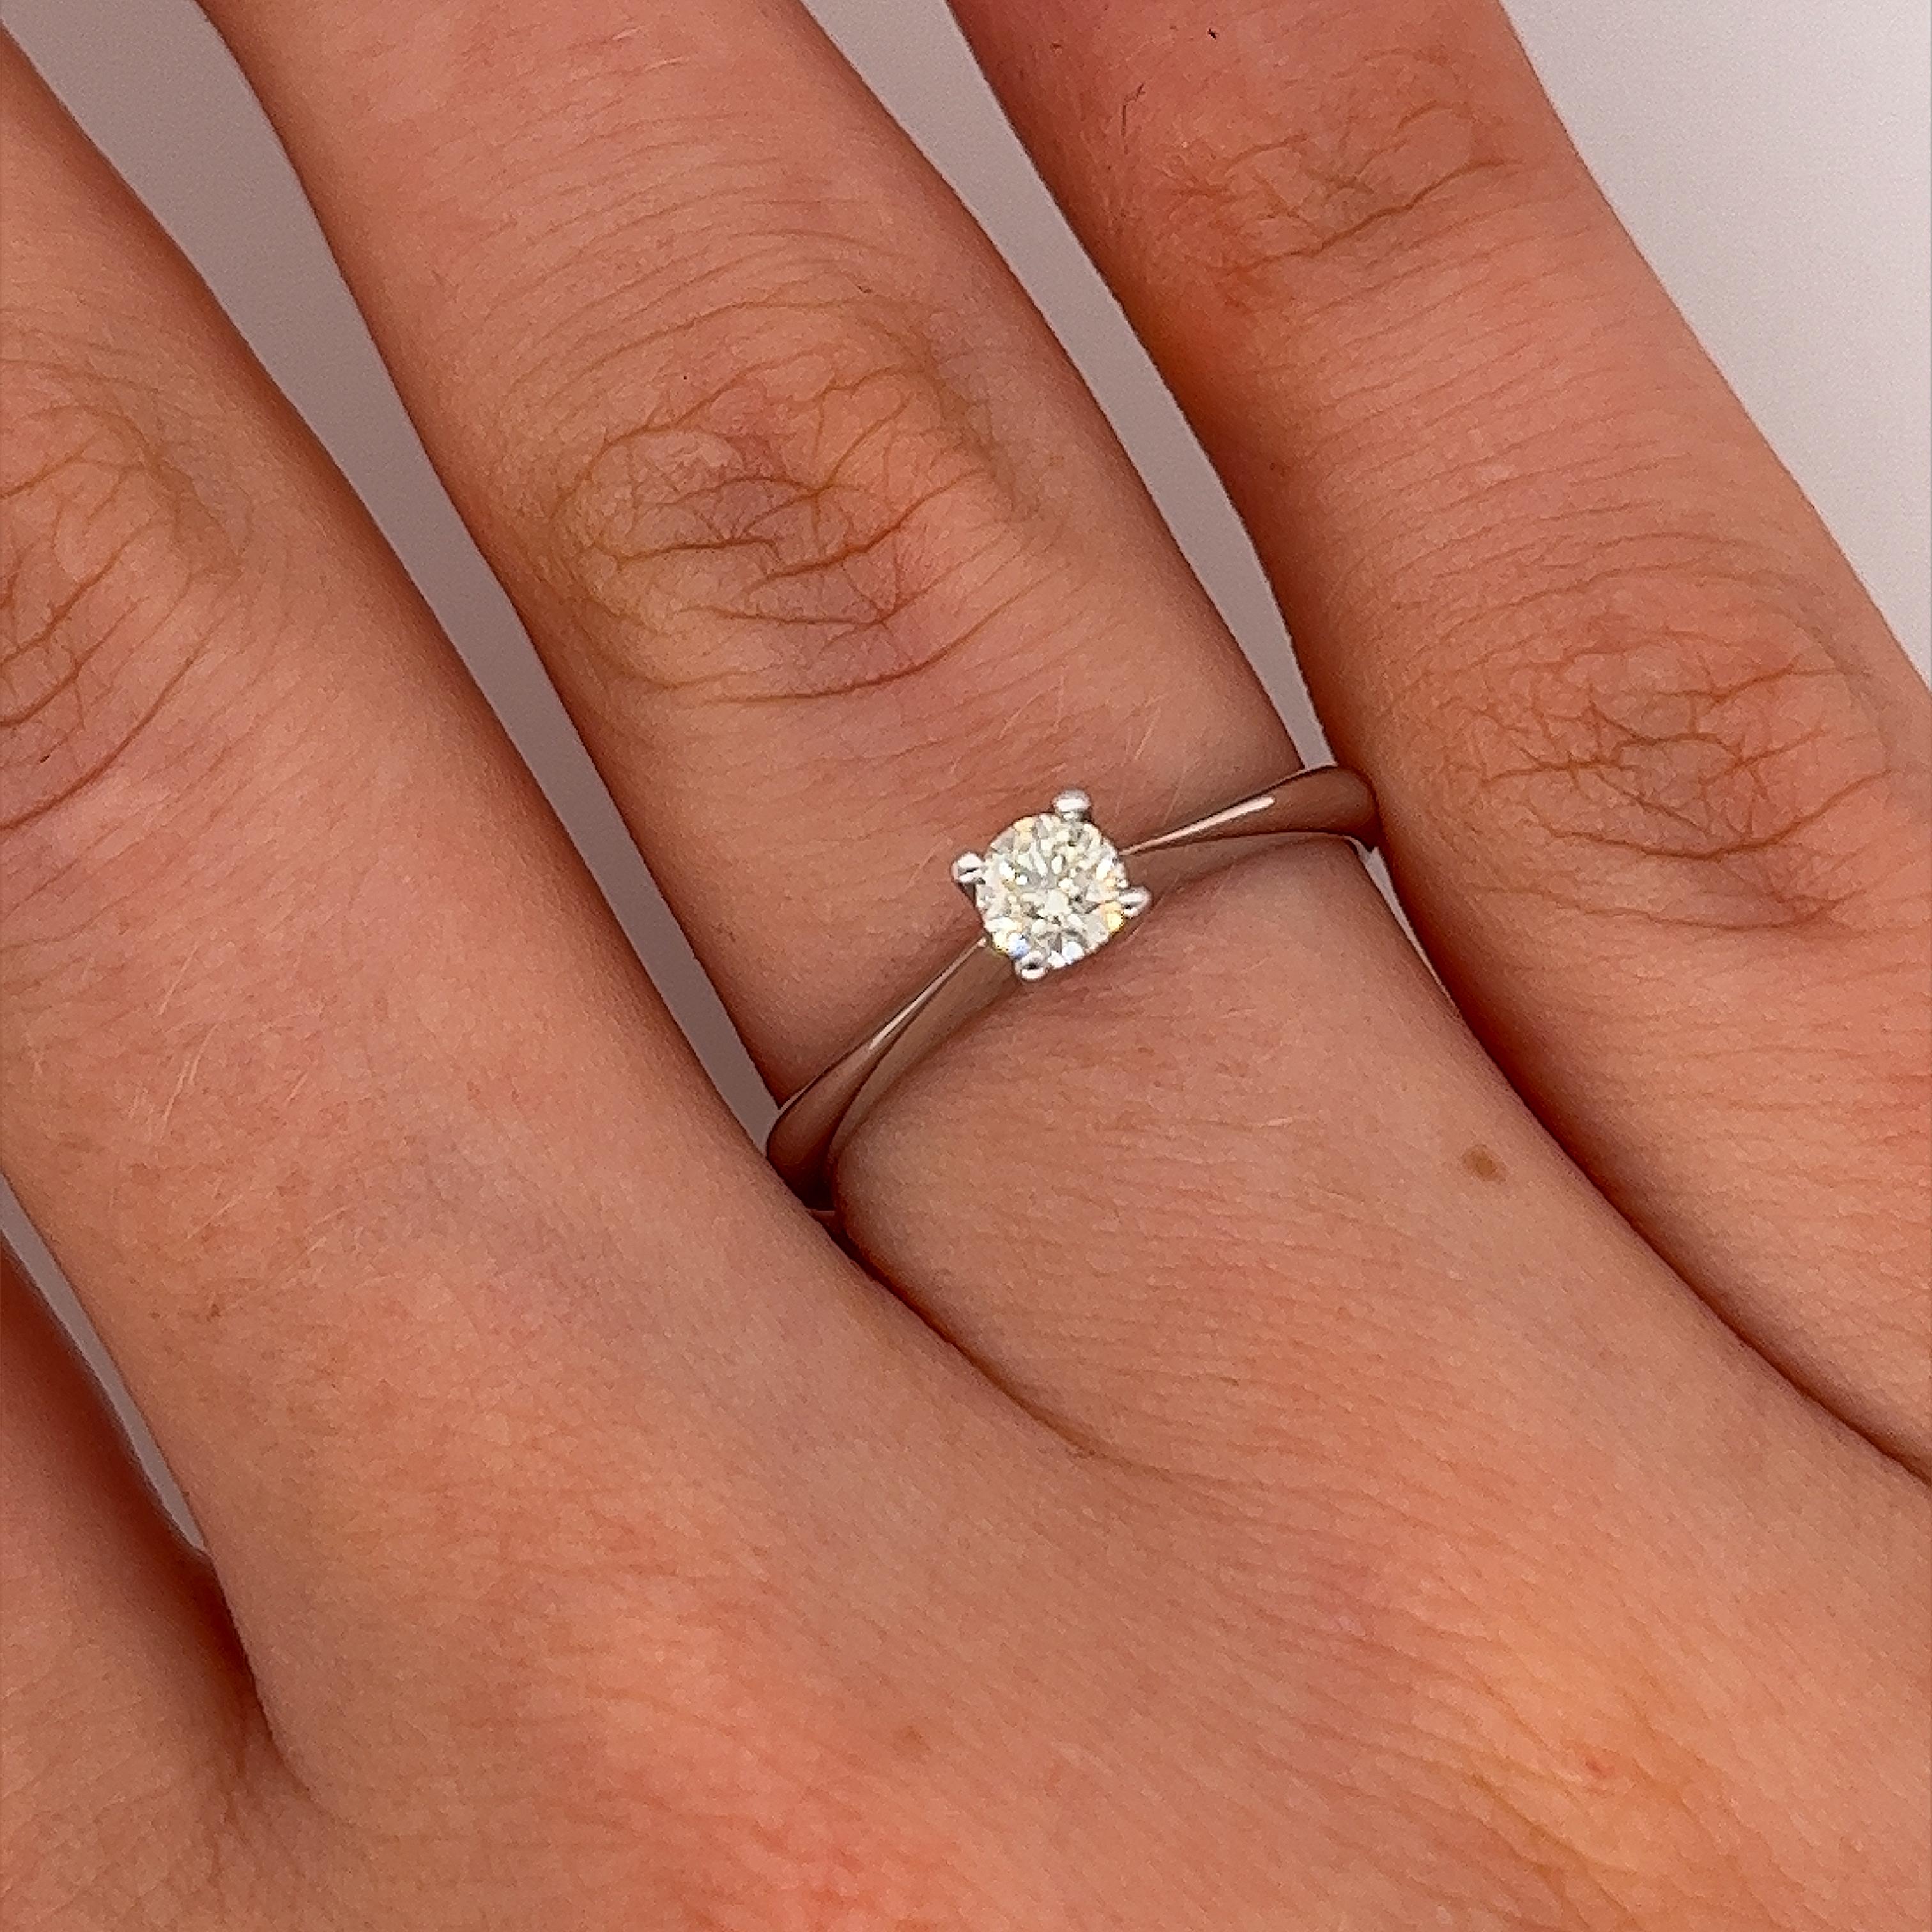 Diamond Solitaire Ring Set With 0.16ct I/SI1 Round Diamond in 18ct White Gold In Excellent Condition For Sale In London, GB